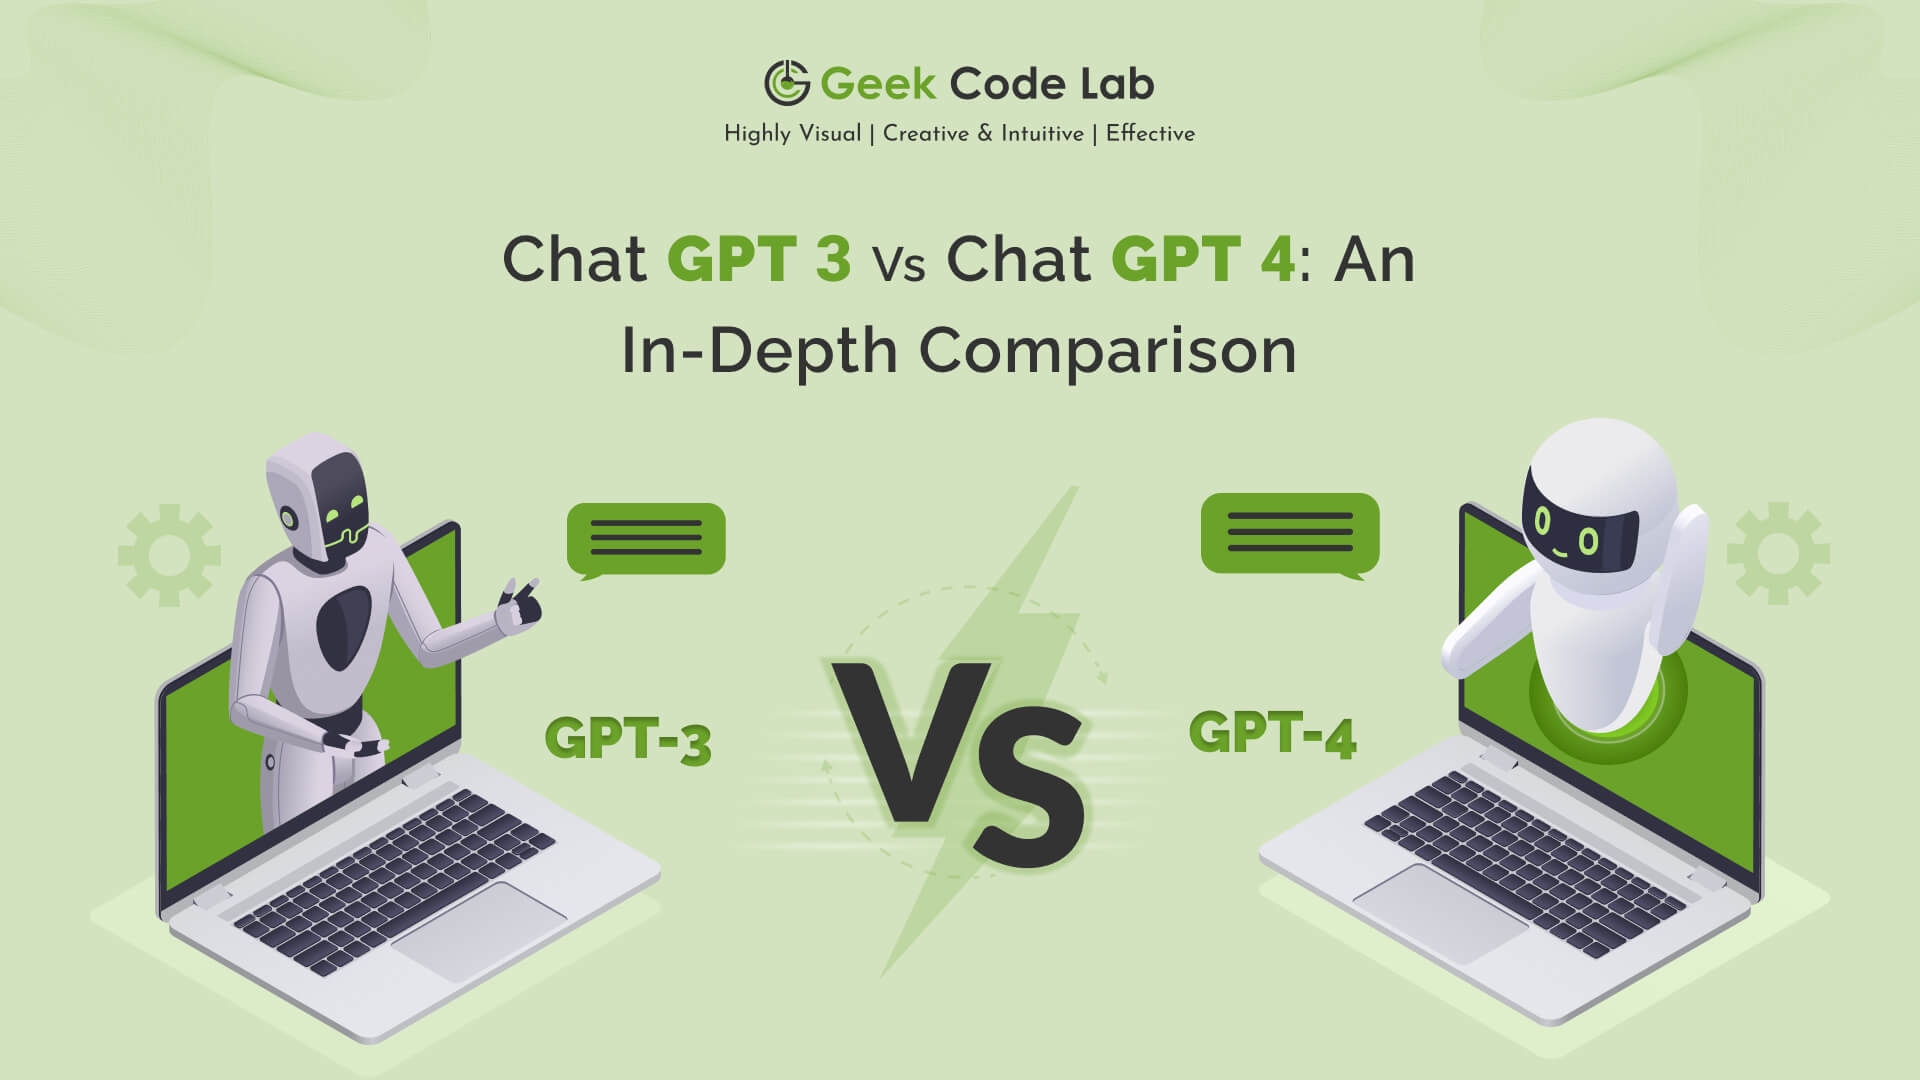 ChatGPT 3 vs 4 : An In-Depth Comparison Between Two Version of ChatGPT